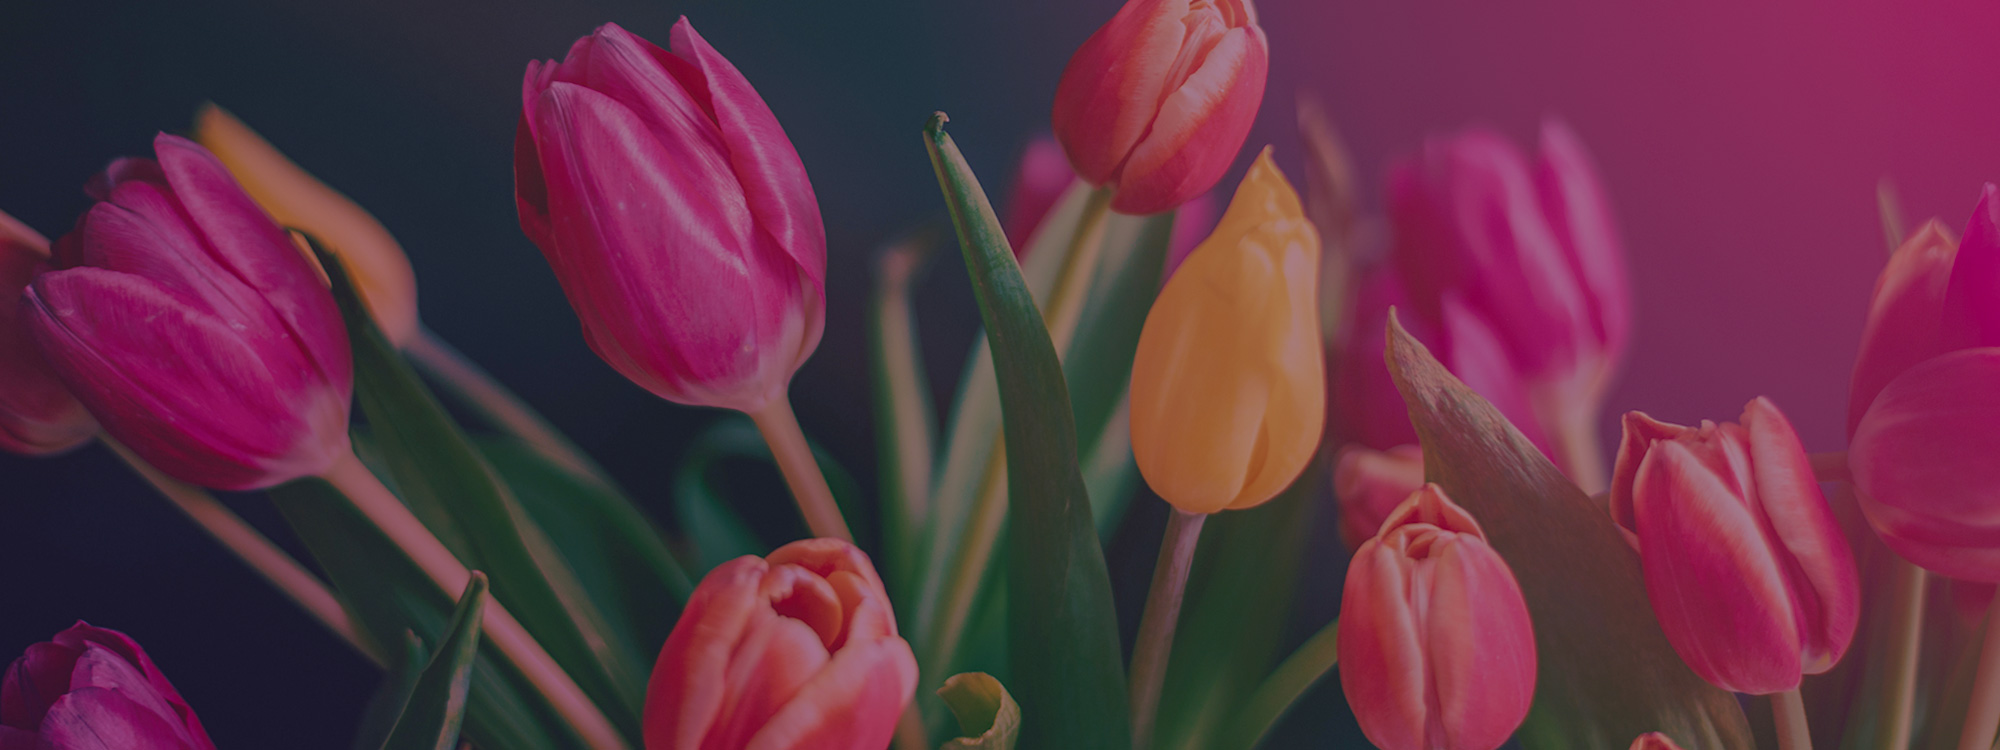 Colourful-Tulips-2000x750px